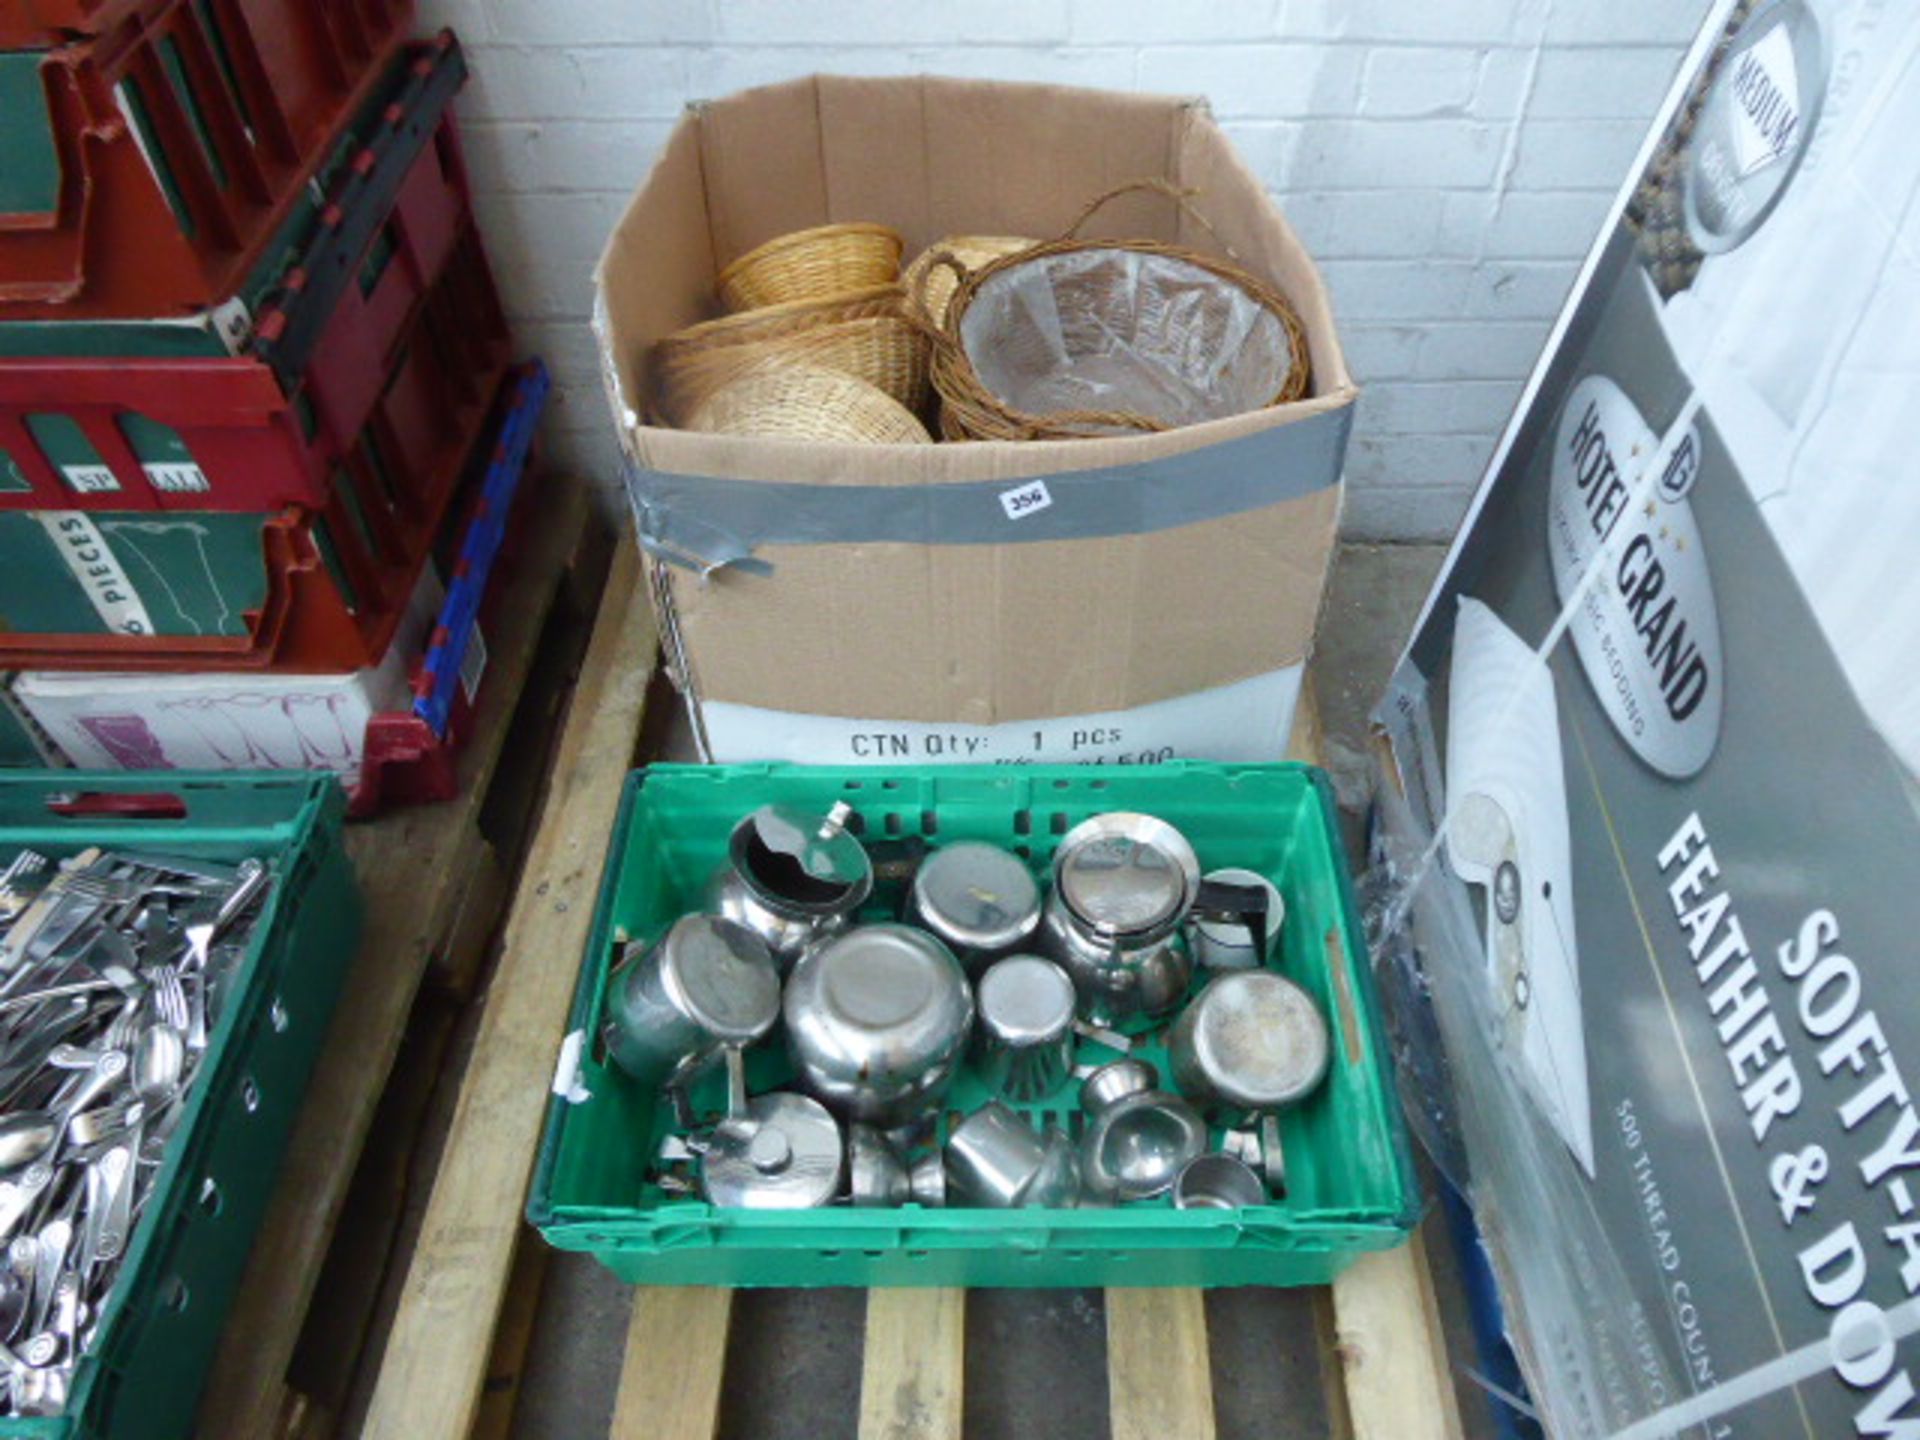 Large box of bread baskets and tray of stainless steel